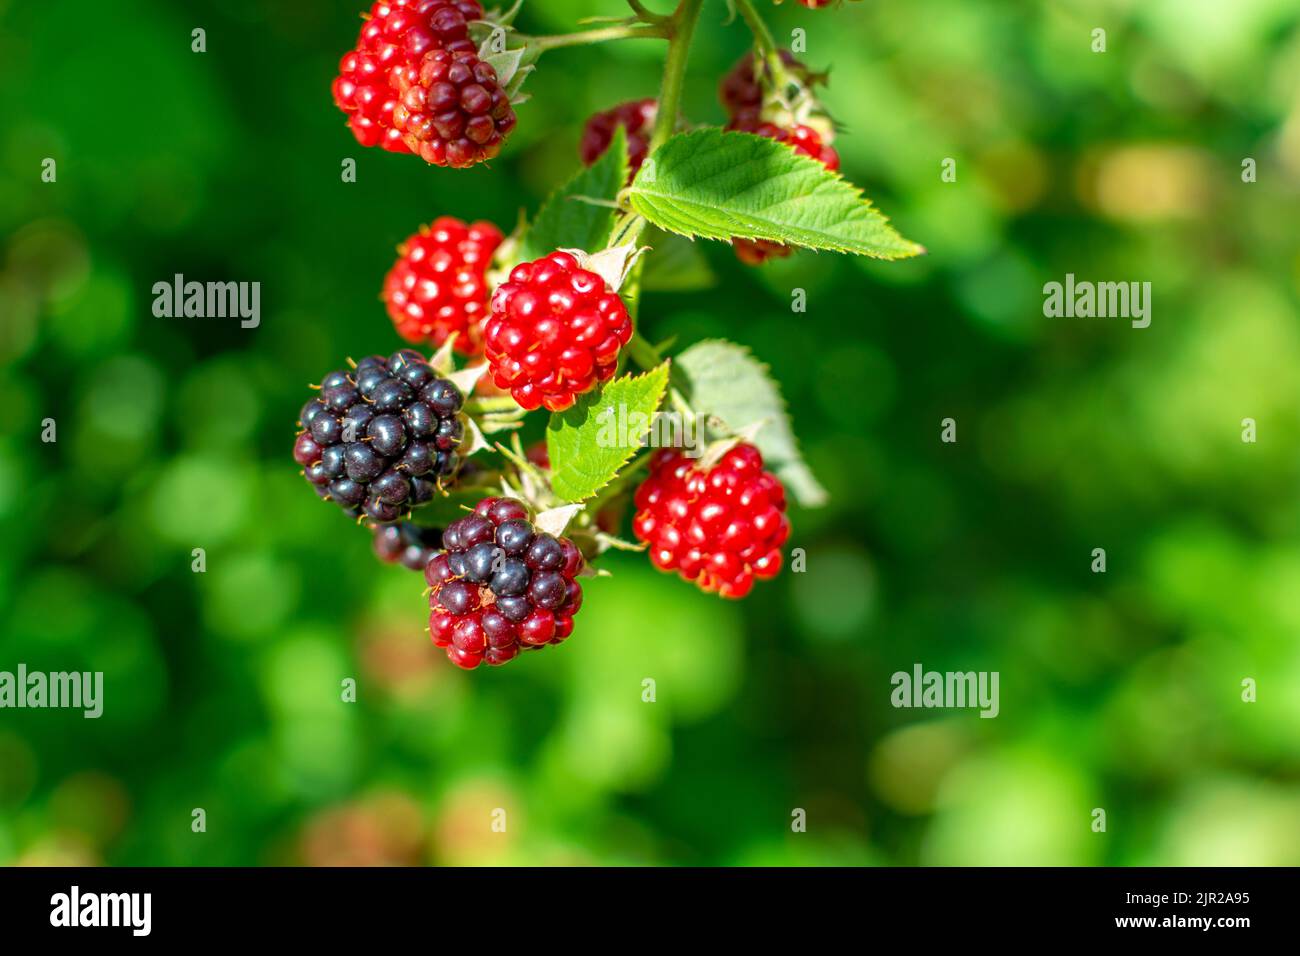 https://c8.alamy.com/comp/2JR2A95/blackberry-a-fruit-shrub-that-grows-wild-and-is-cultivated-in-gardens-2JR2A95.jpg